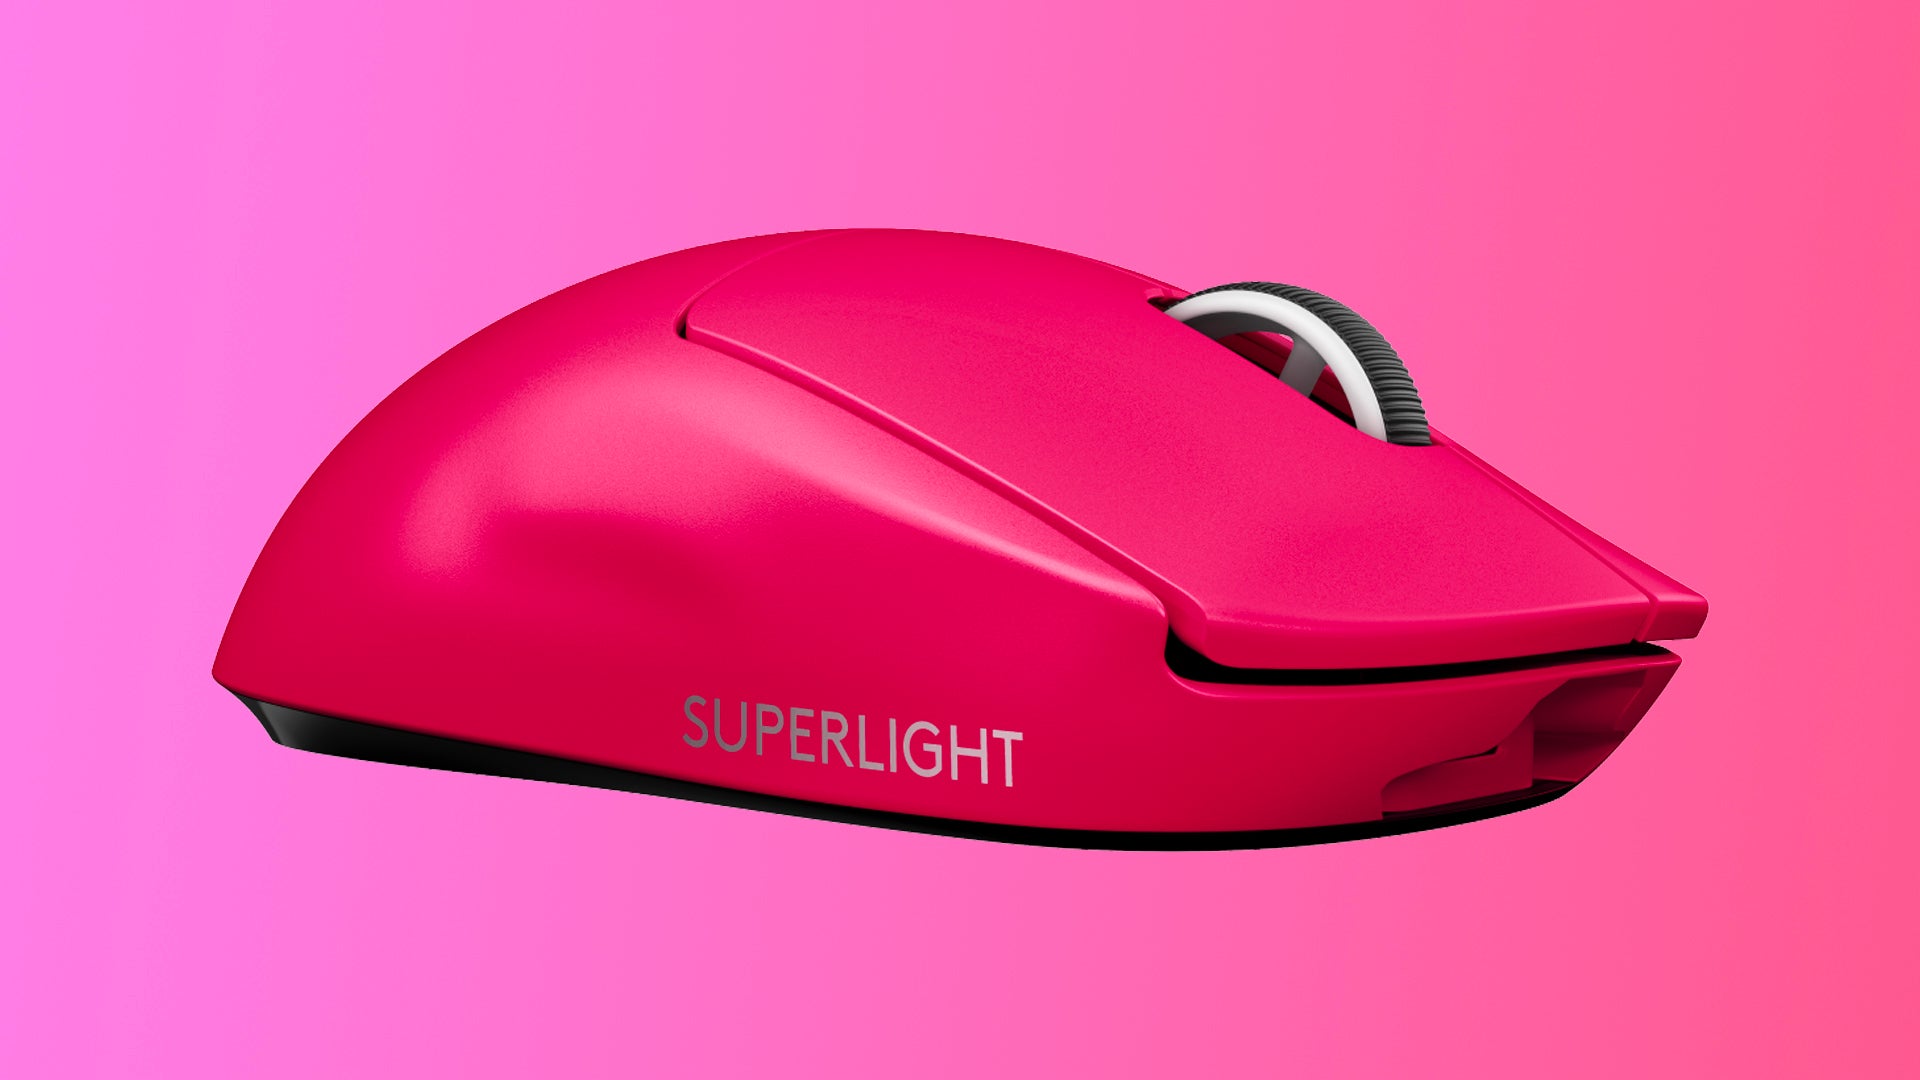 Image for Win big with this excellent Currys deal on the Logitech G Pro X Superlight